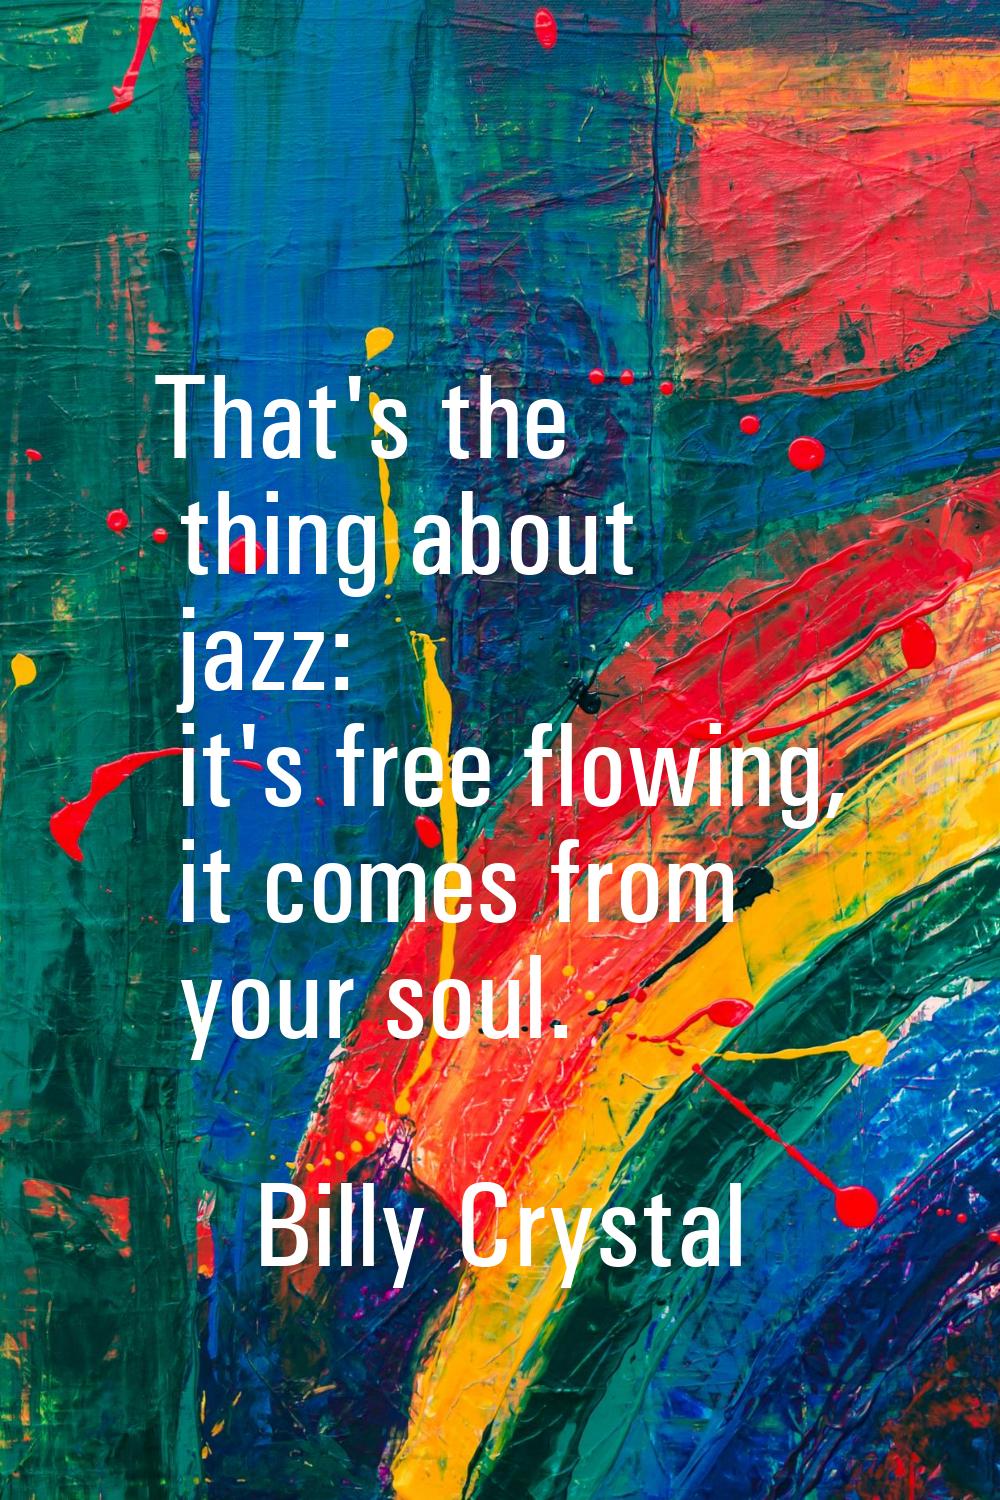 That's the thing about jazz: it's free flowing, it comes from your soul.